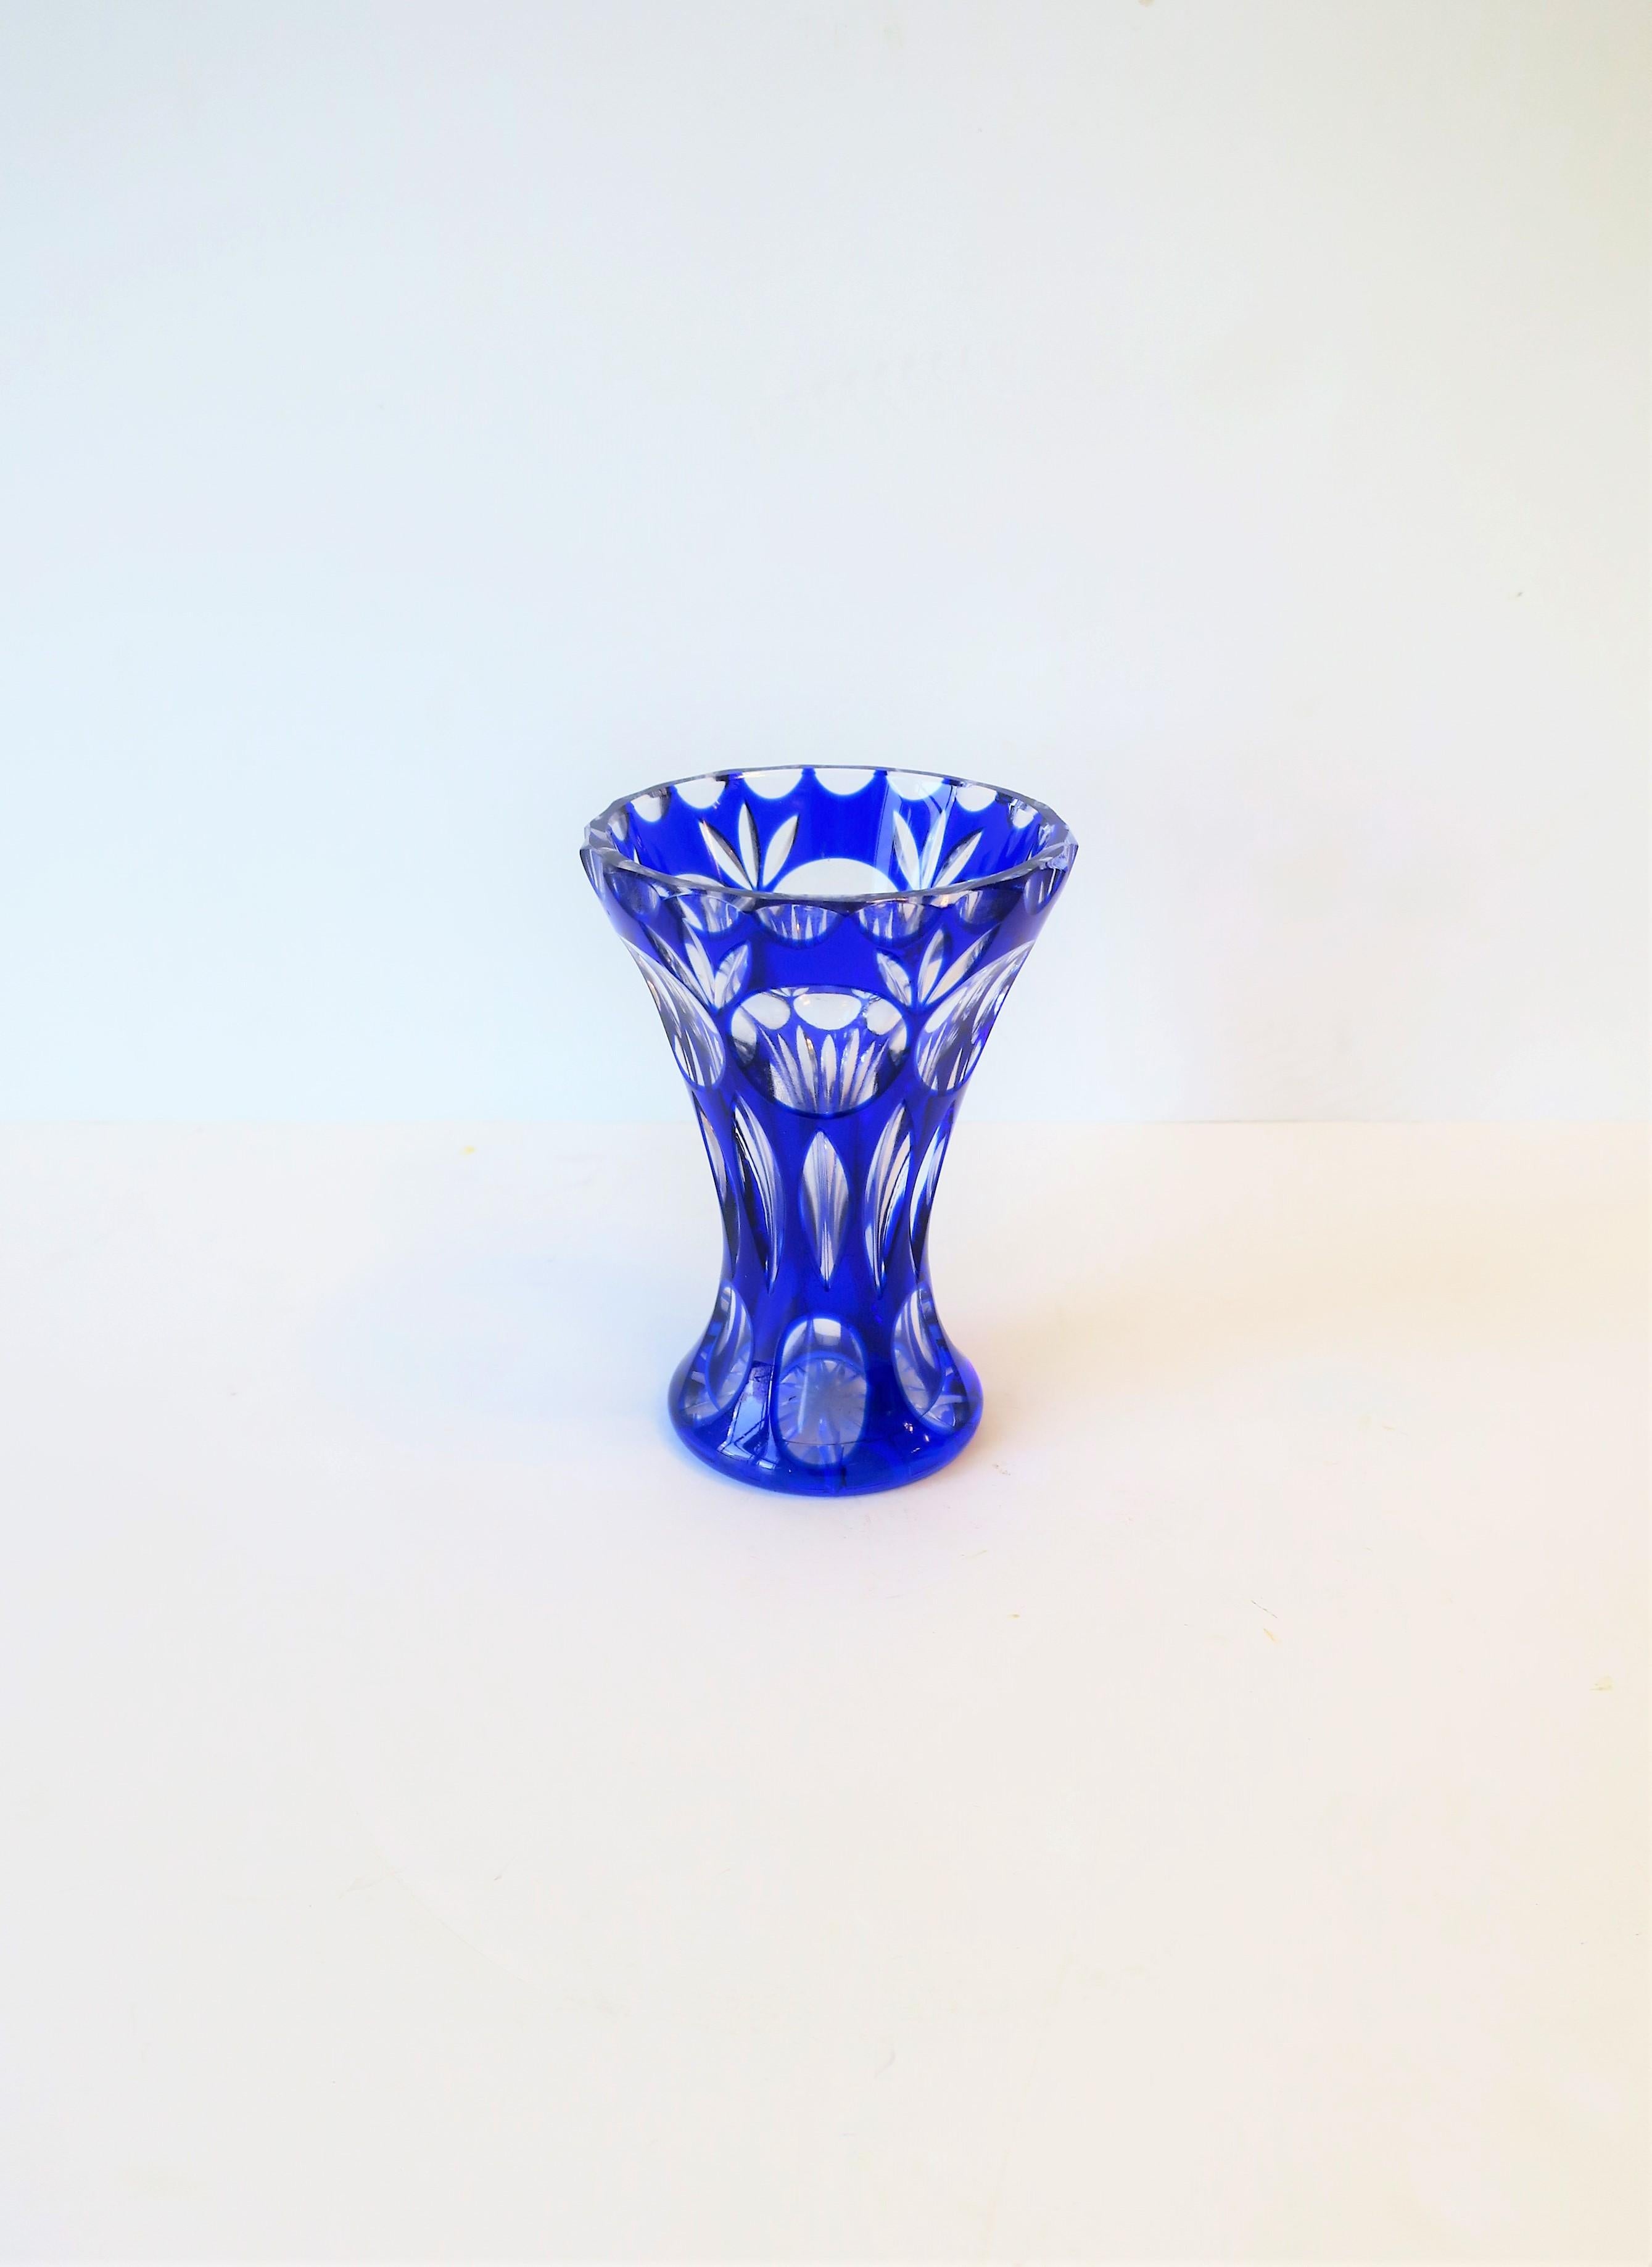 A very beautiful small and substantial Bohemian clear and sapphire blue crystal vase, circa early 20th century, Czechoslovakia. Vase is in the style of luxury crystal glass maker Moser. Piece is substantial with beautiful cut details from top to